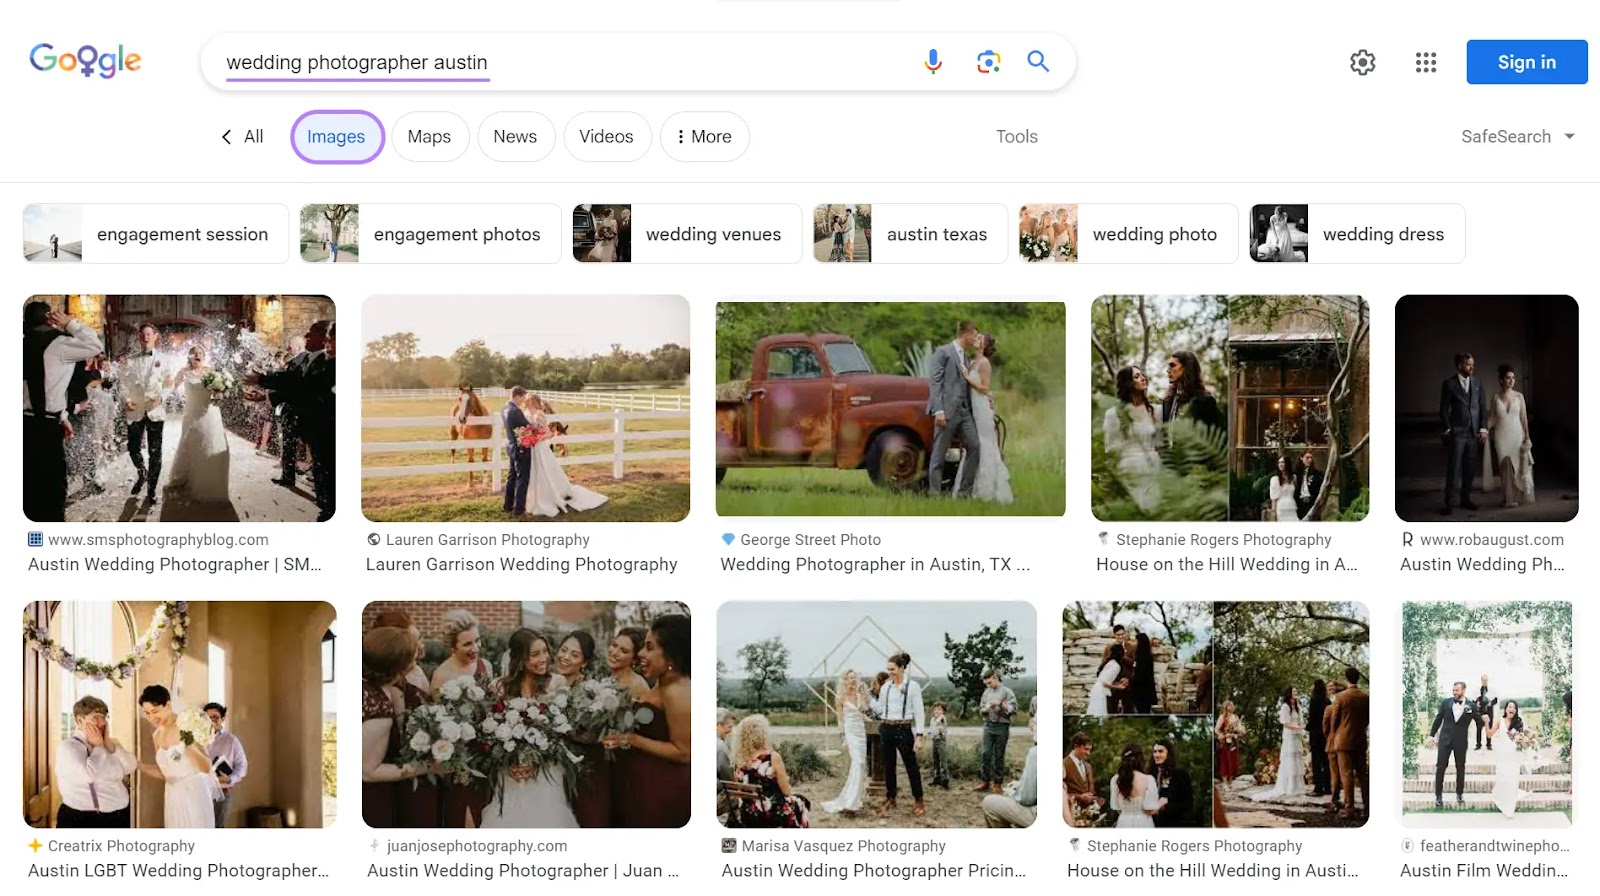 "Images" results connected  Google for "wedding lensman  austin" query